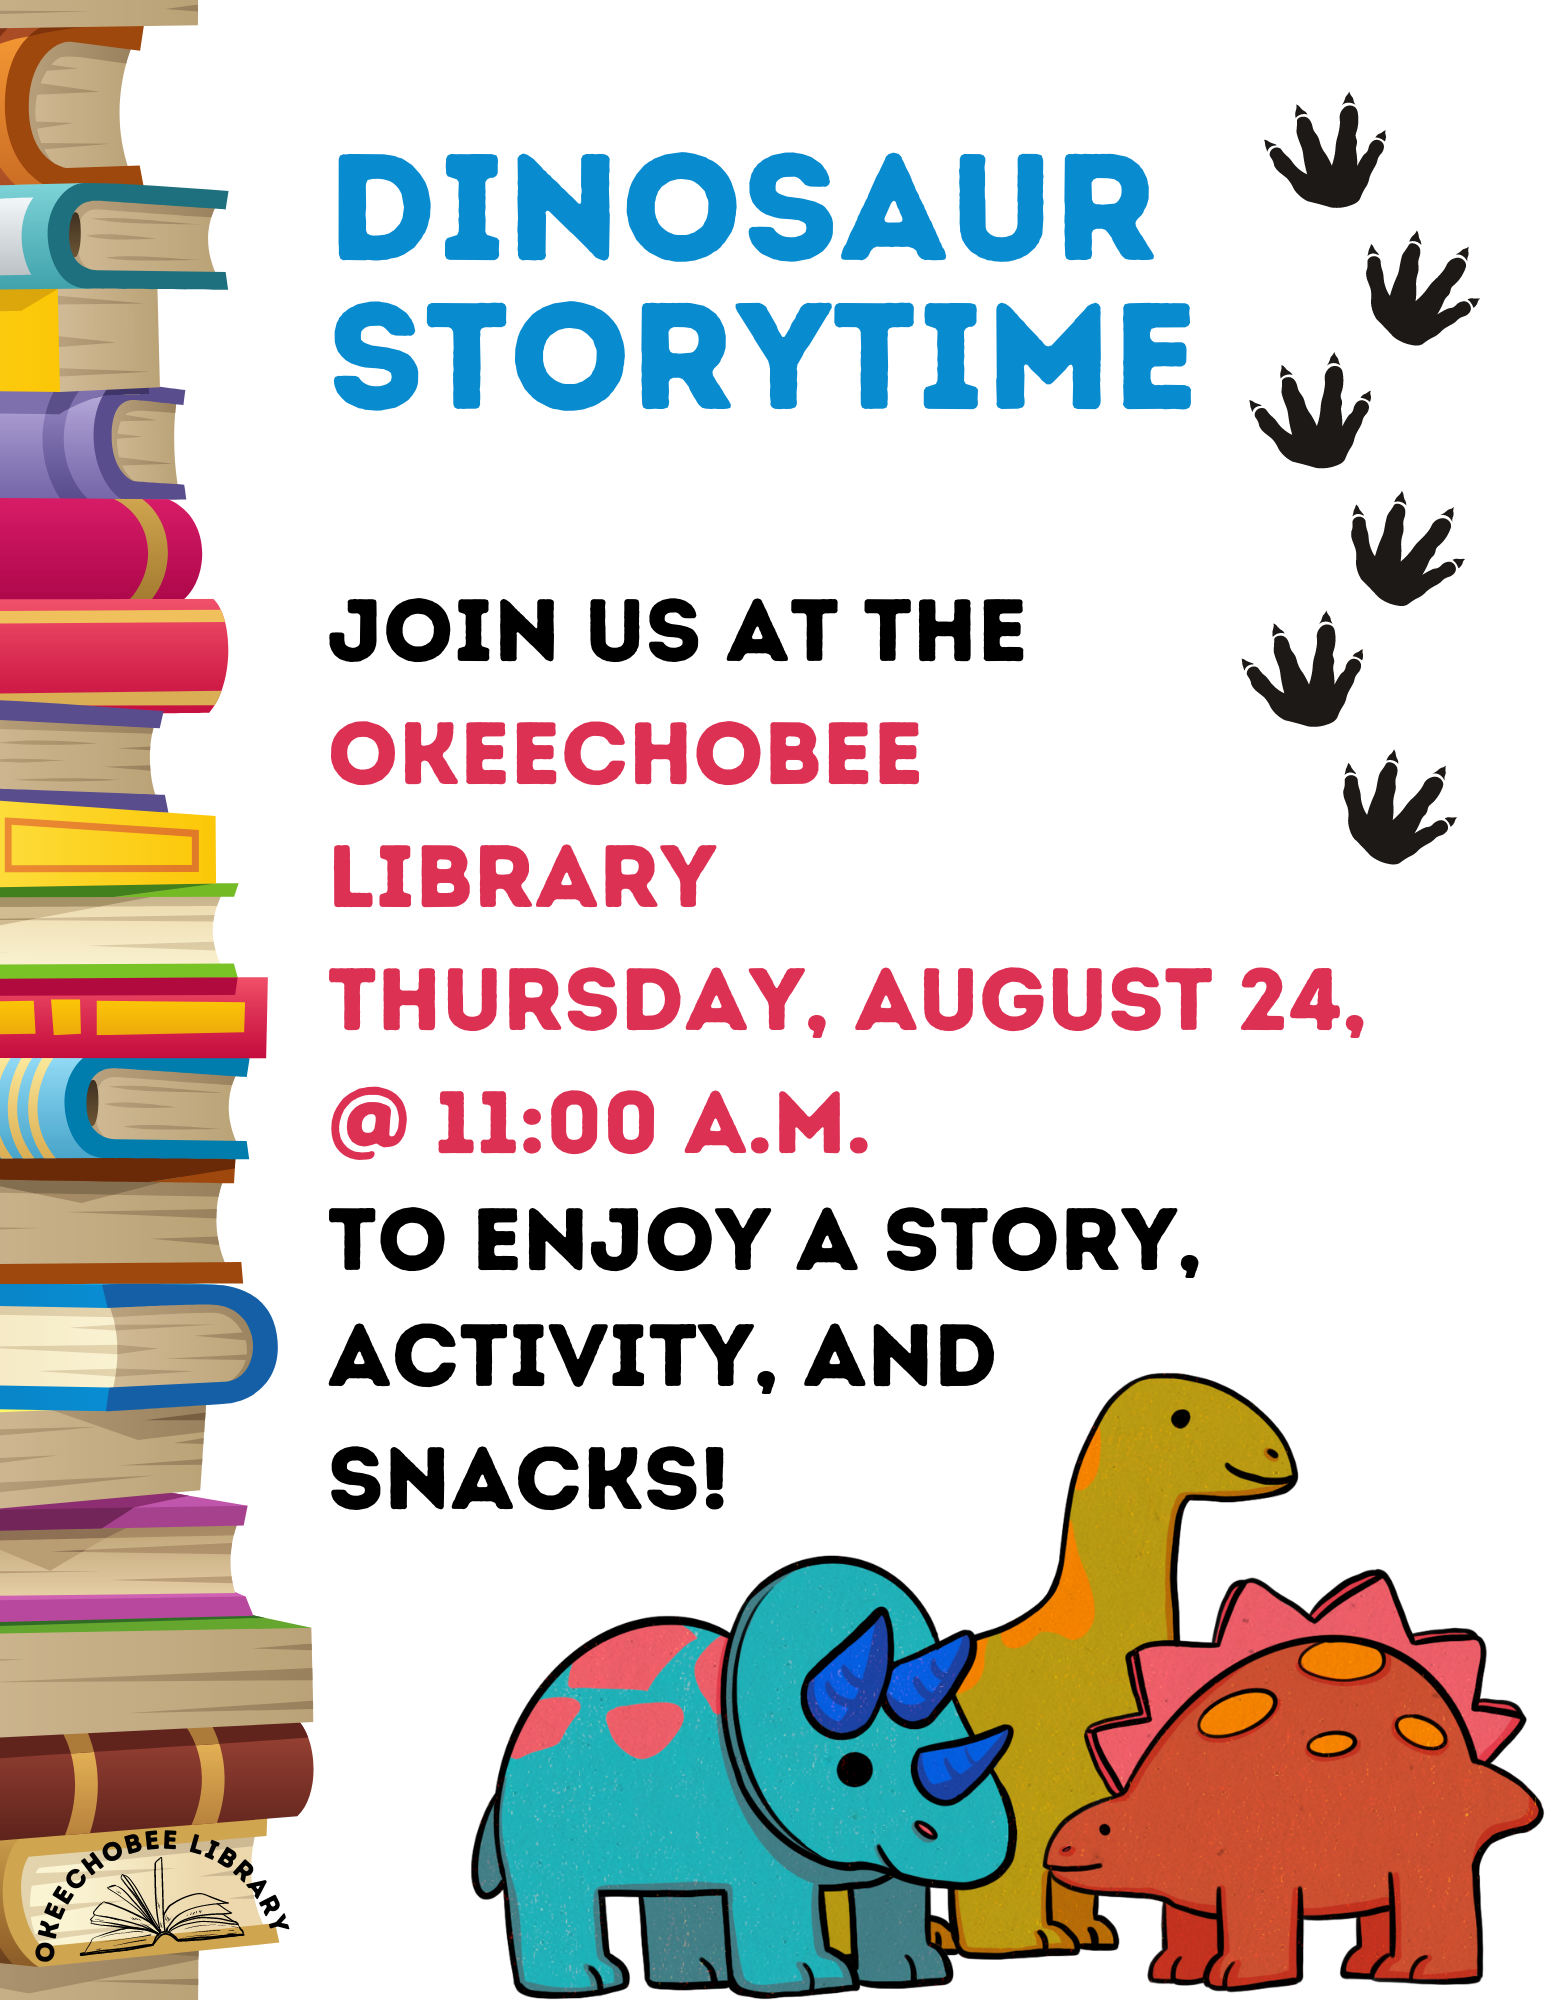 Join us at the Okeechobee Library on August 24th at 11:00 A.M. for our Dinosaur Story Time! Come enjoy a story, a simple activity, and fun snacks